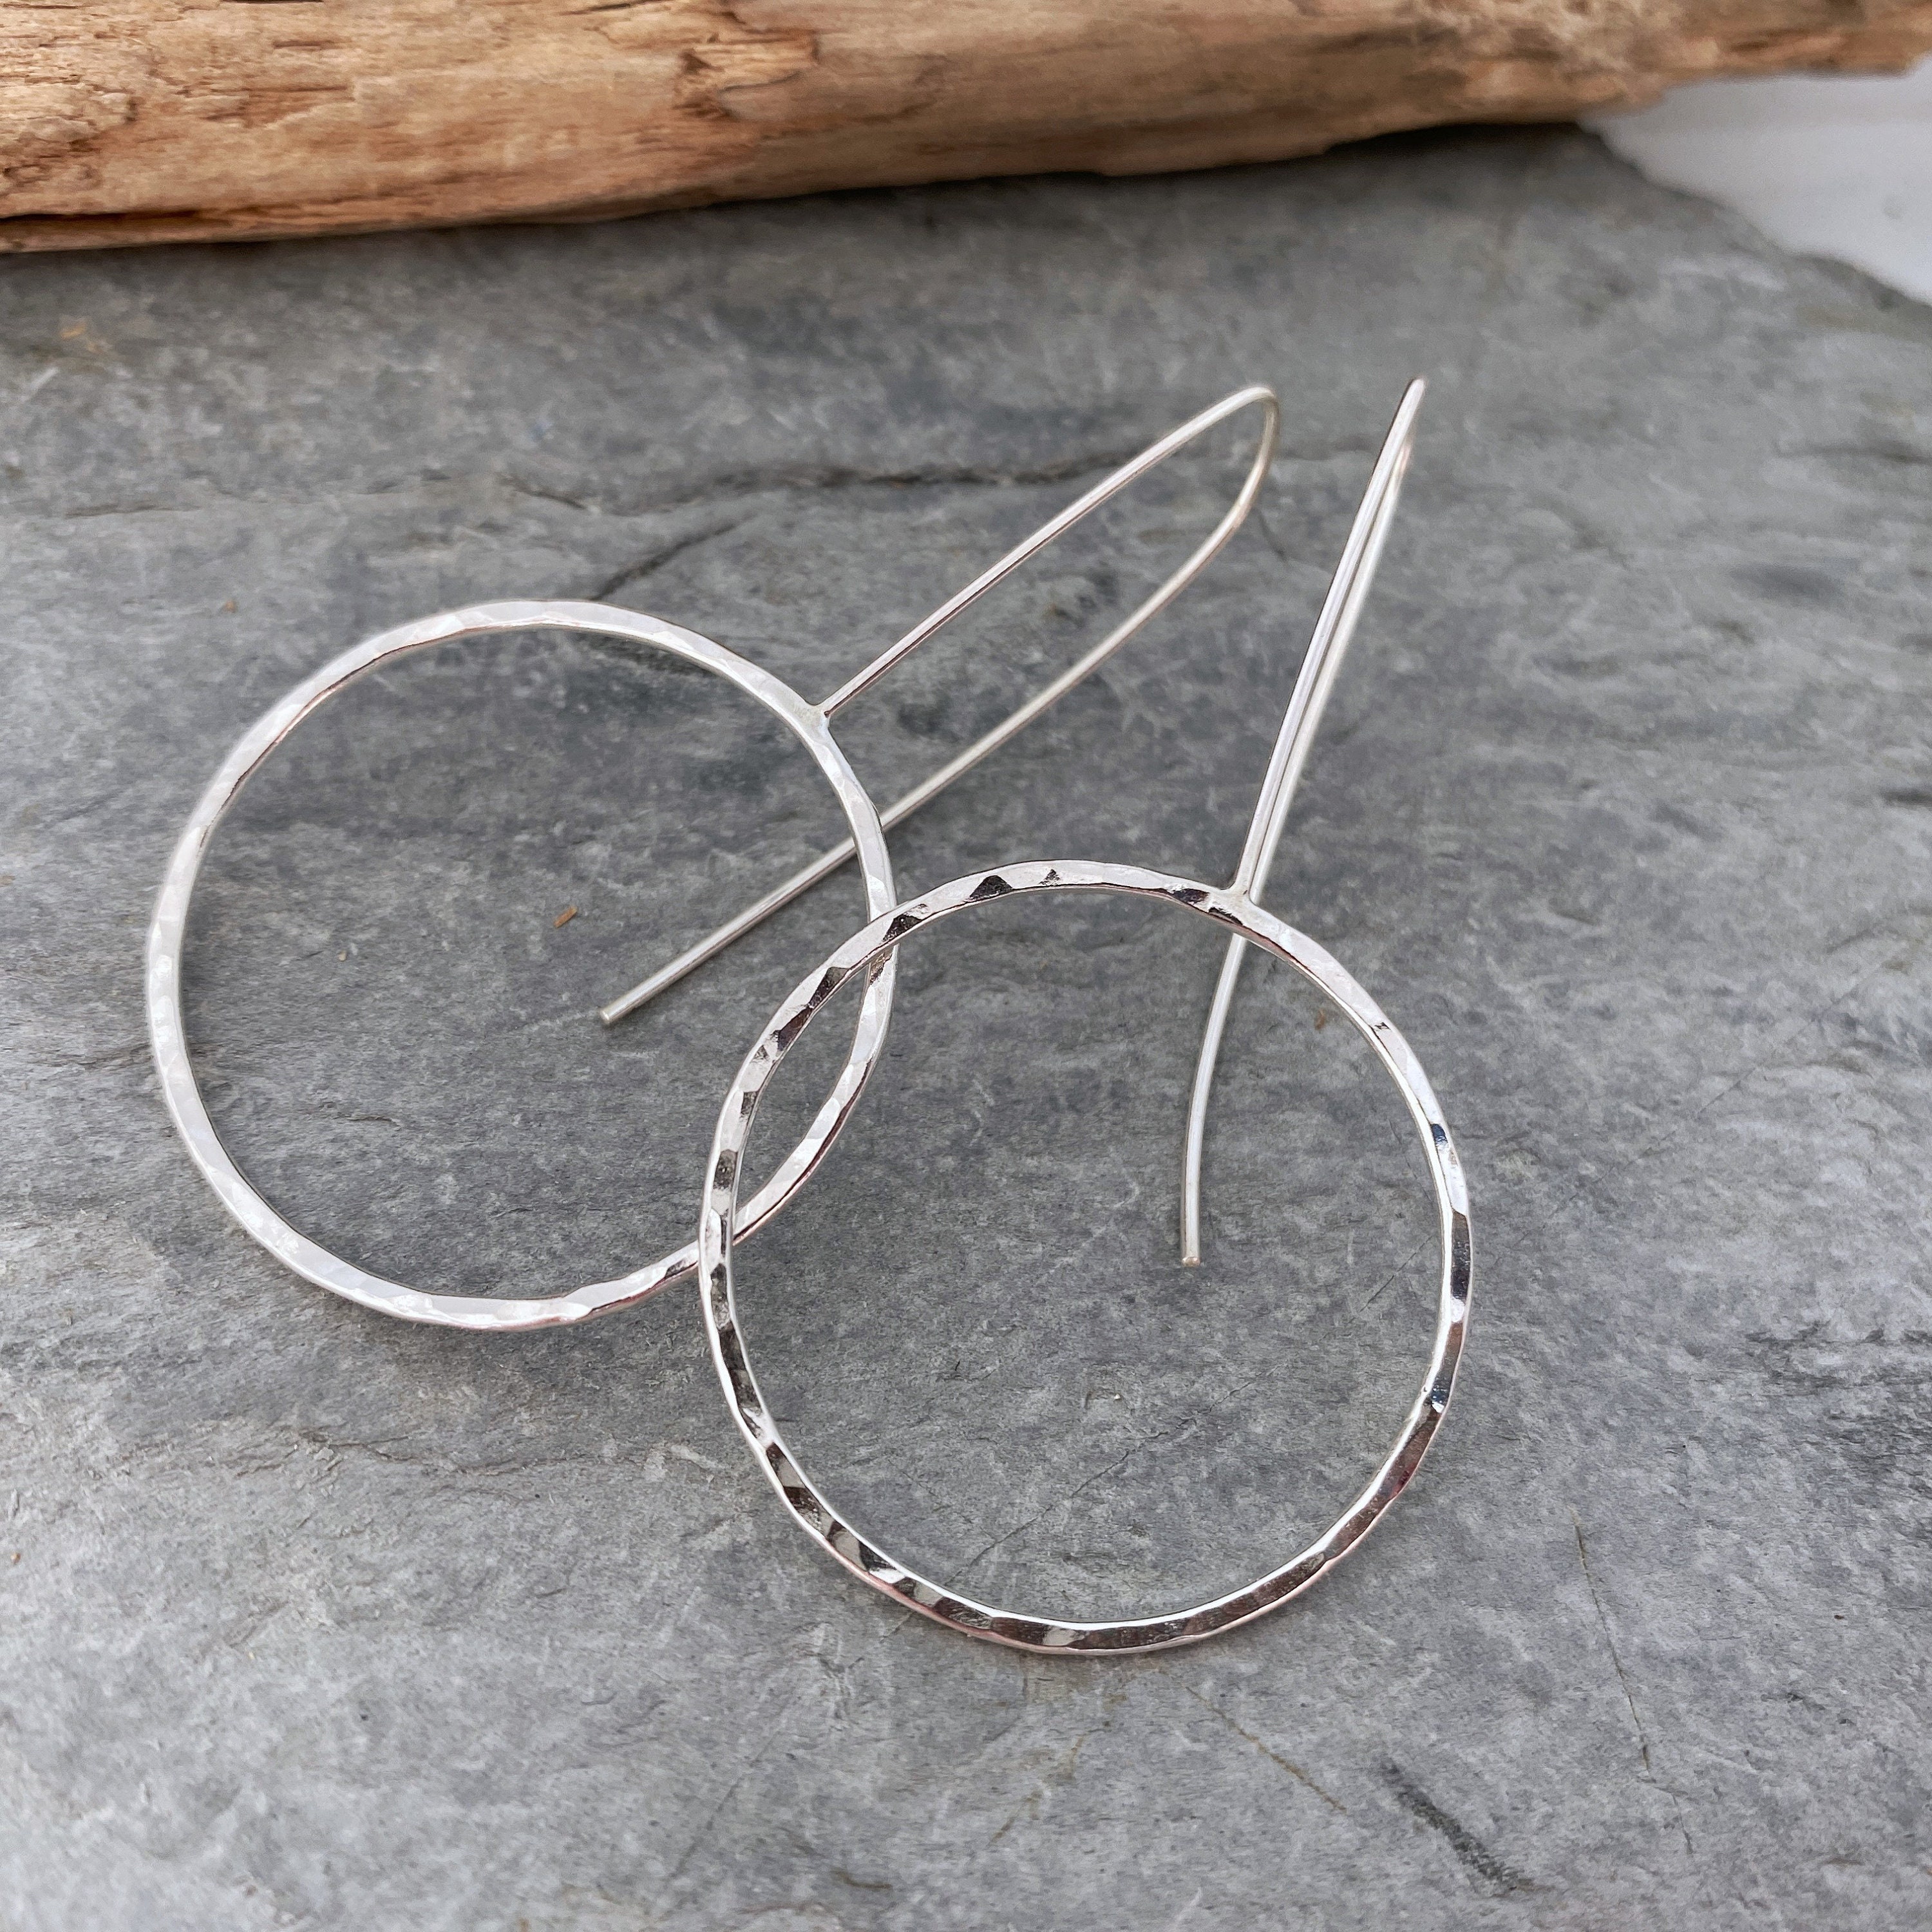 Large Hoop Earrings Made From Hammered Silver in A Simple, Contemporary Design